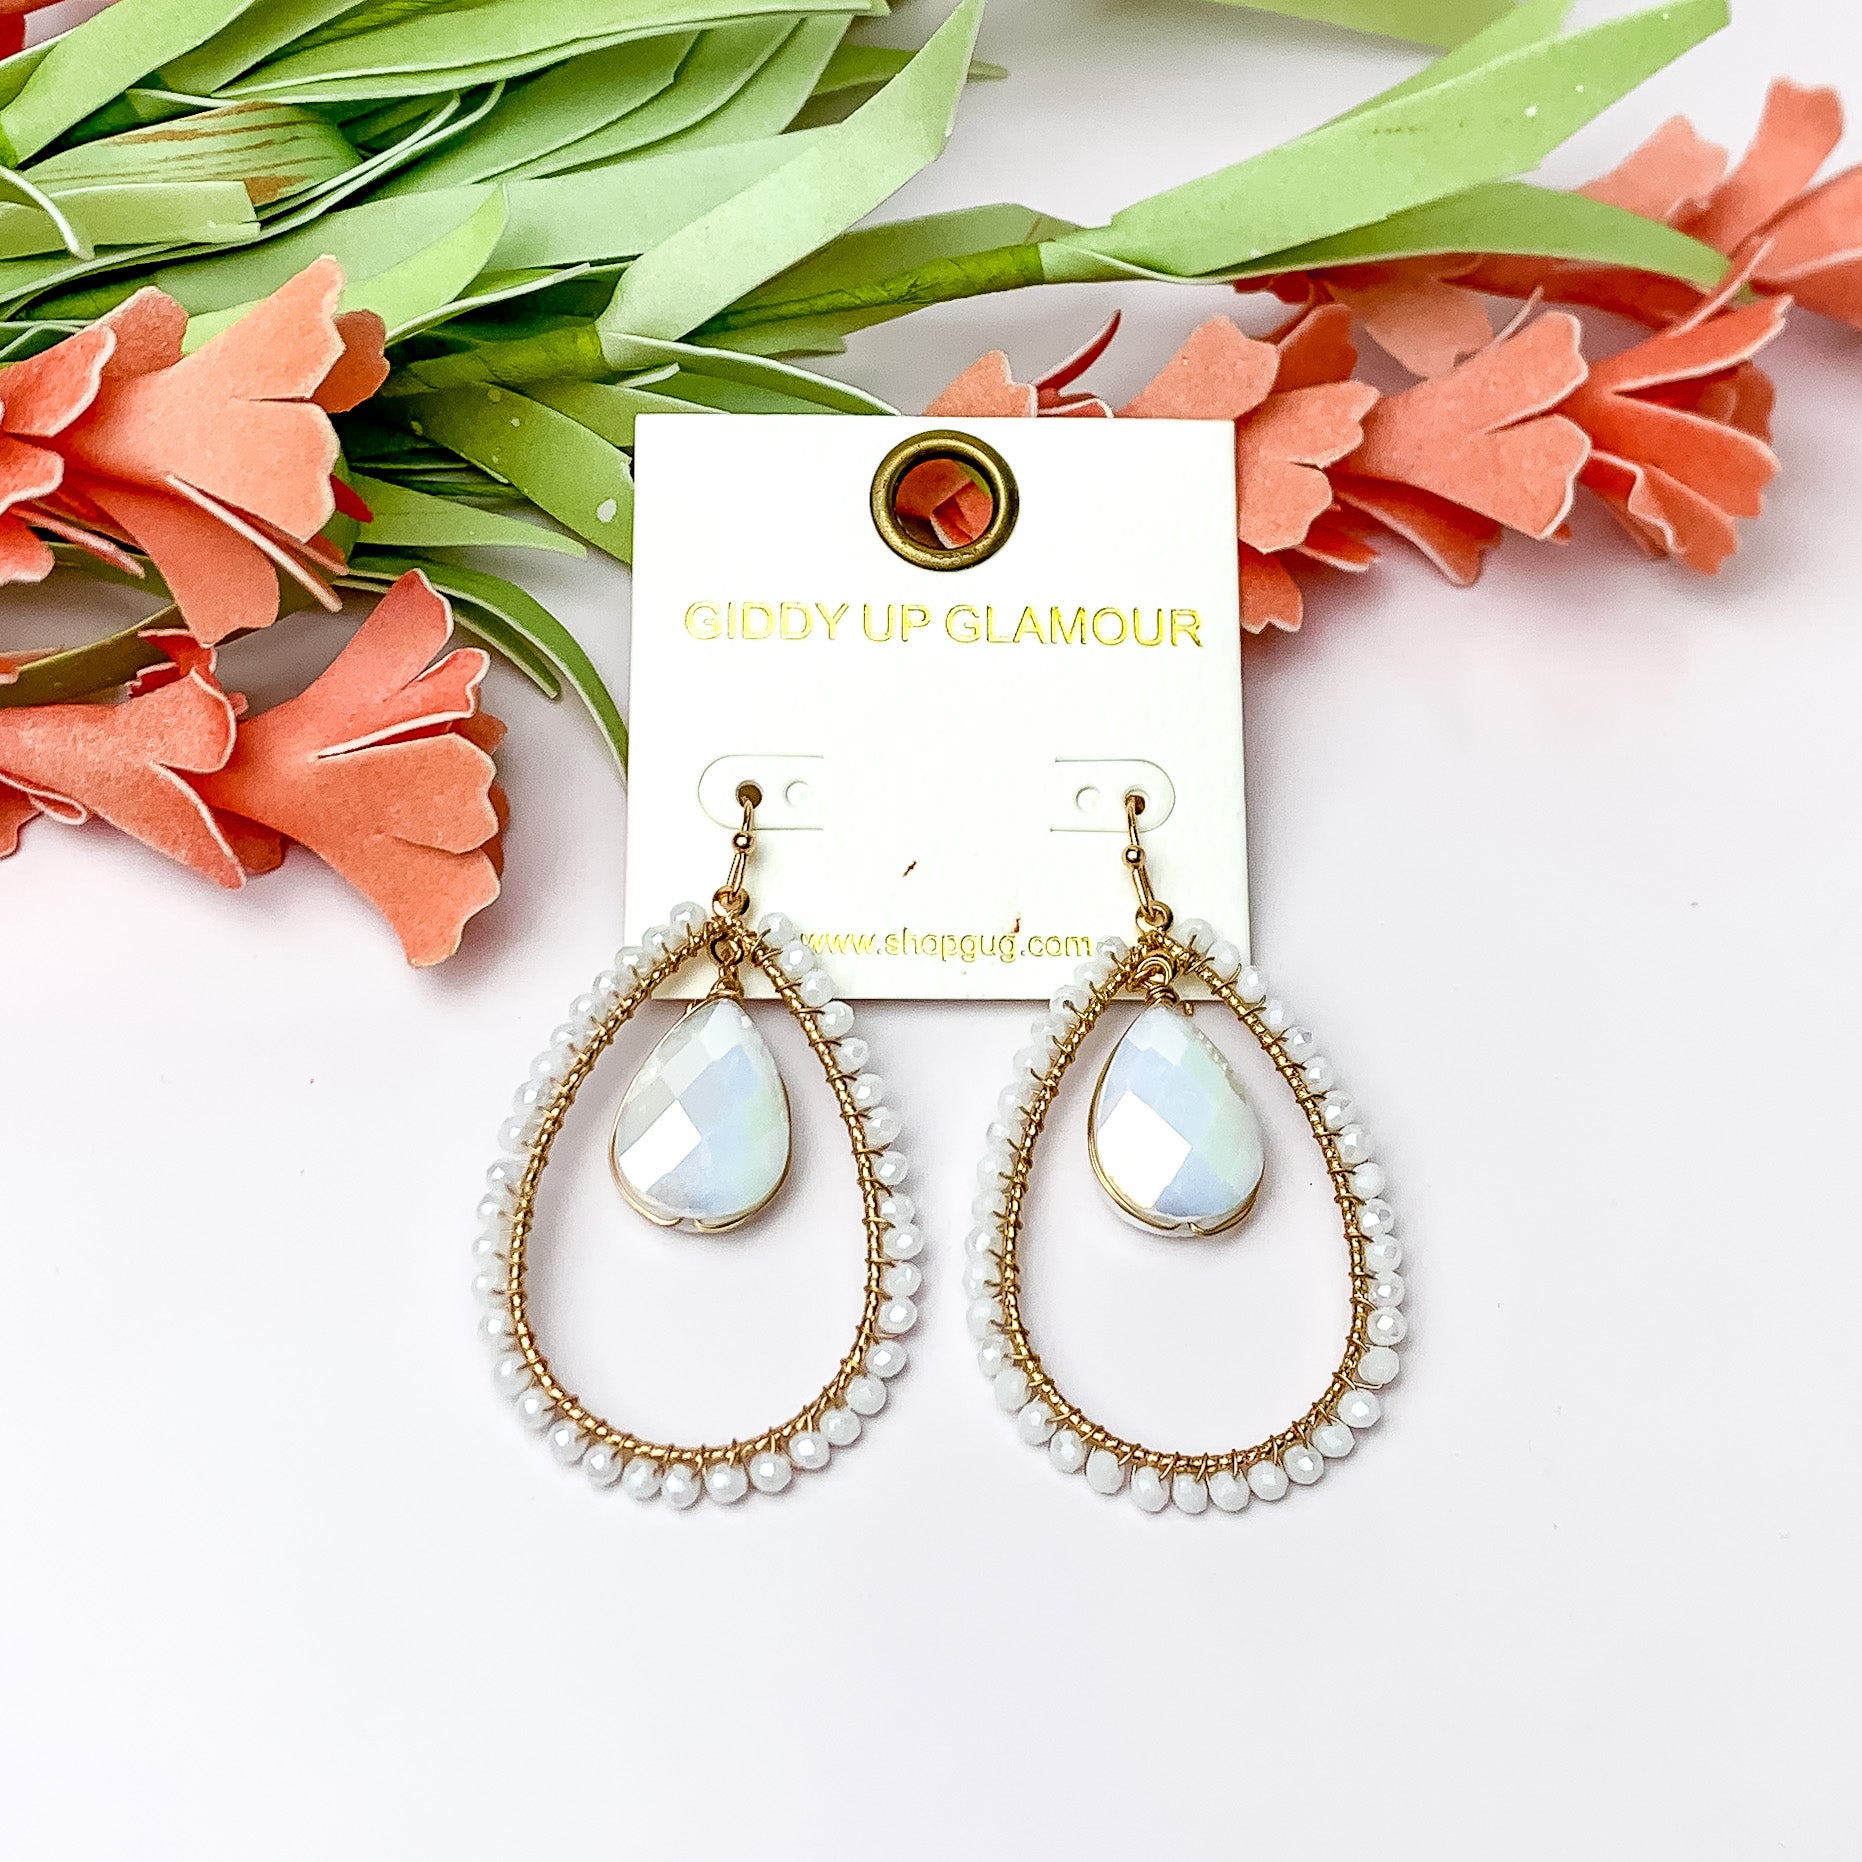 White Iridescent Stone Inside Open Beaded Teardrop Earrings with Gold Tone Outline - Giddy Up Glamour Boutique